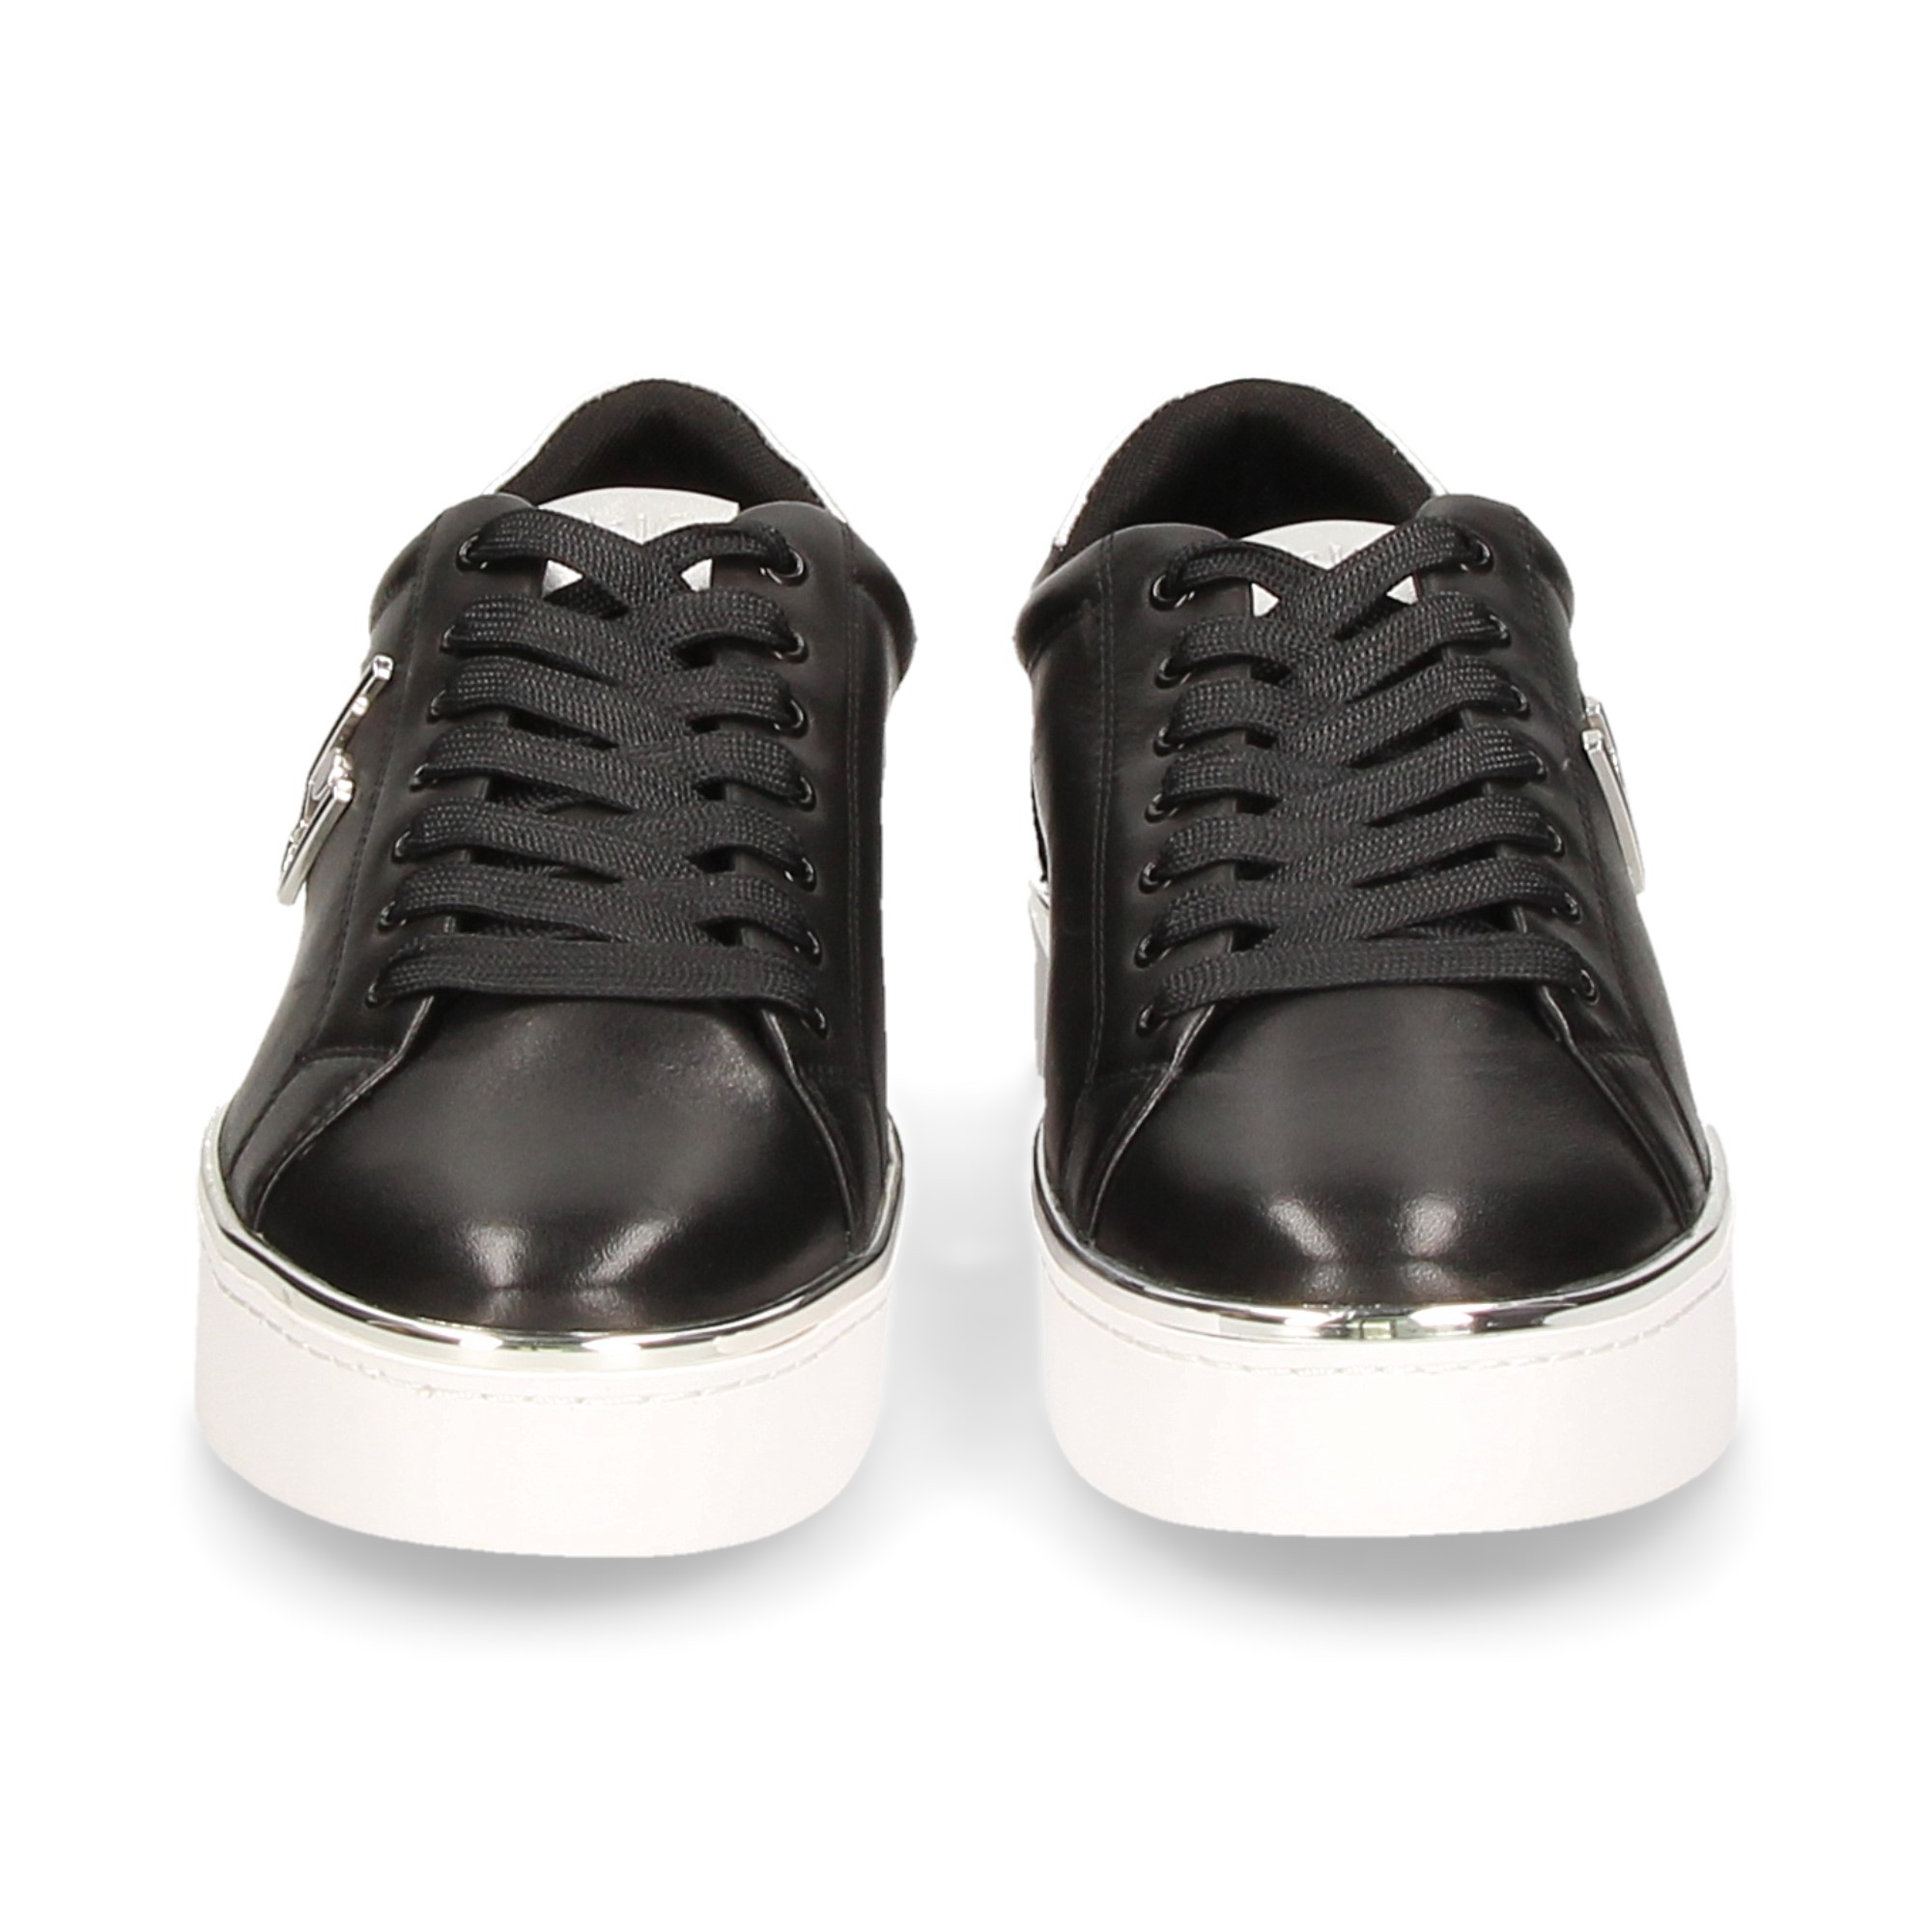 sporty-live-silver-black-leather